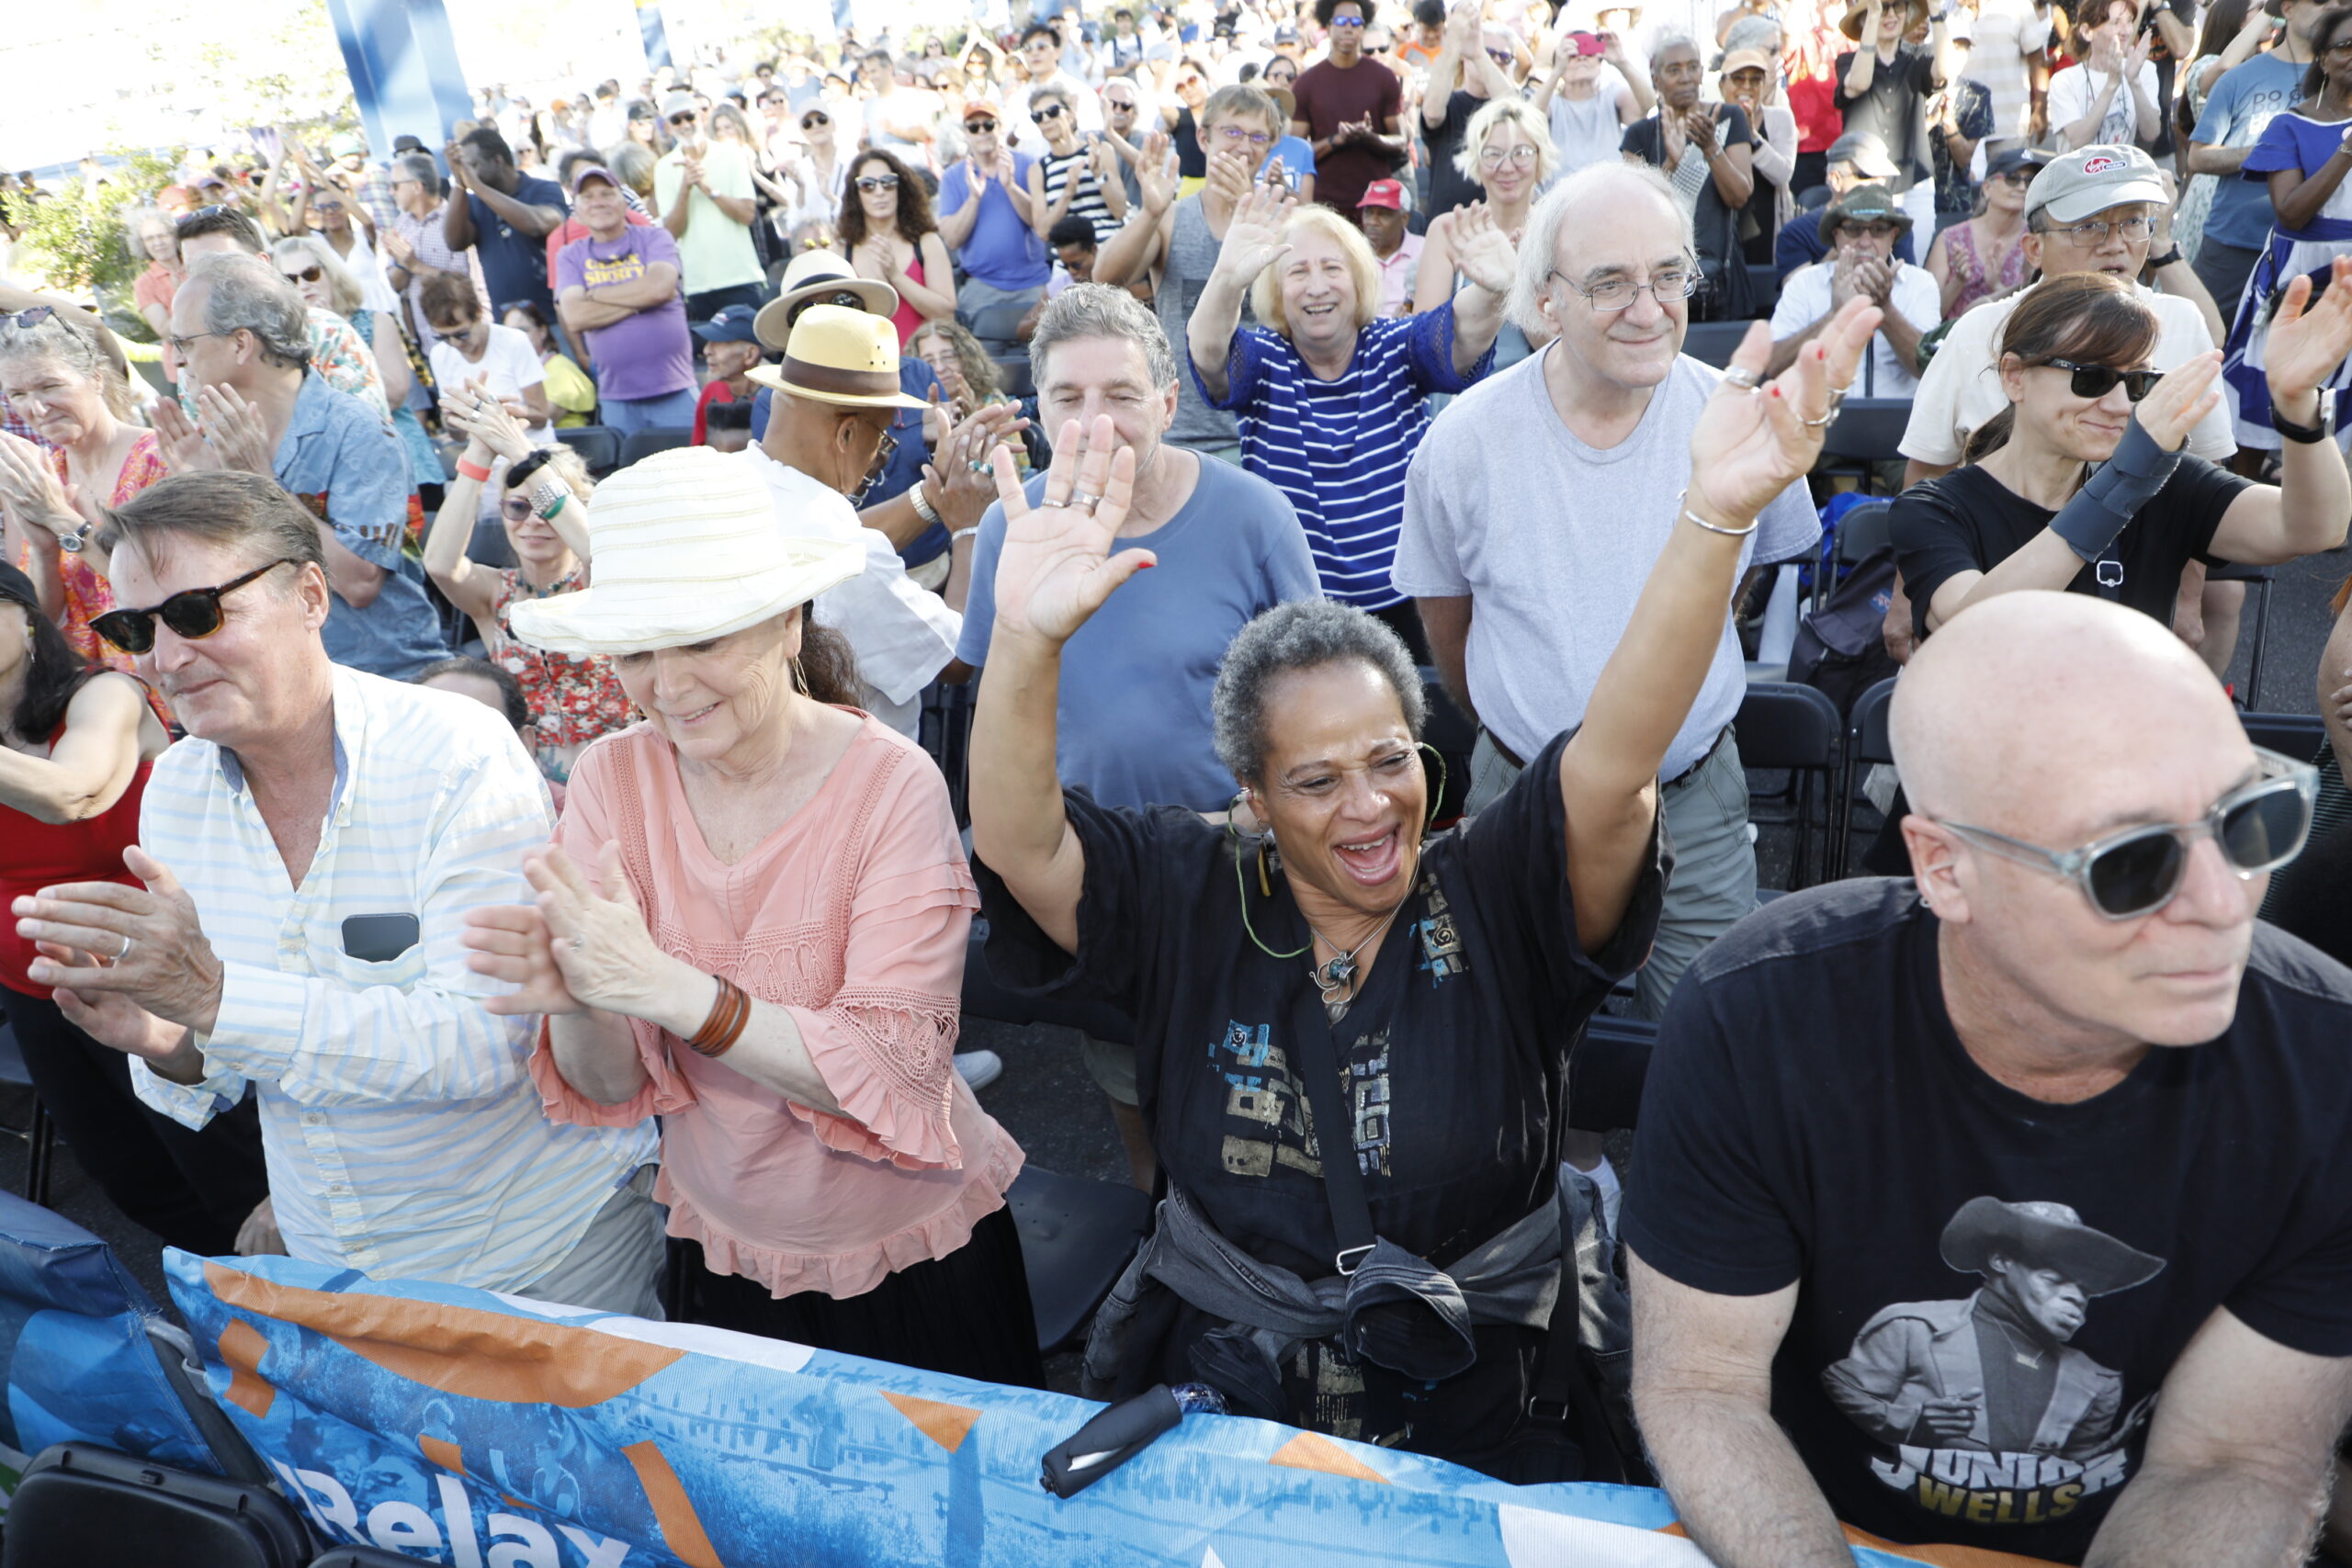 Blues BBQ Festival attendees dancing in front of the stage